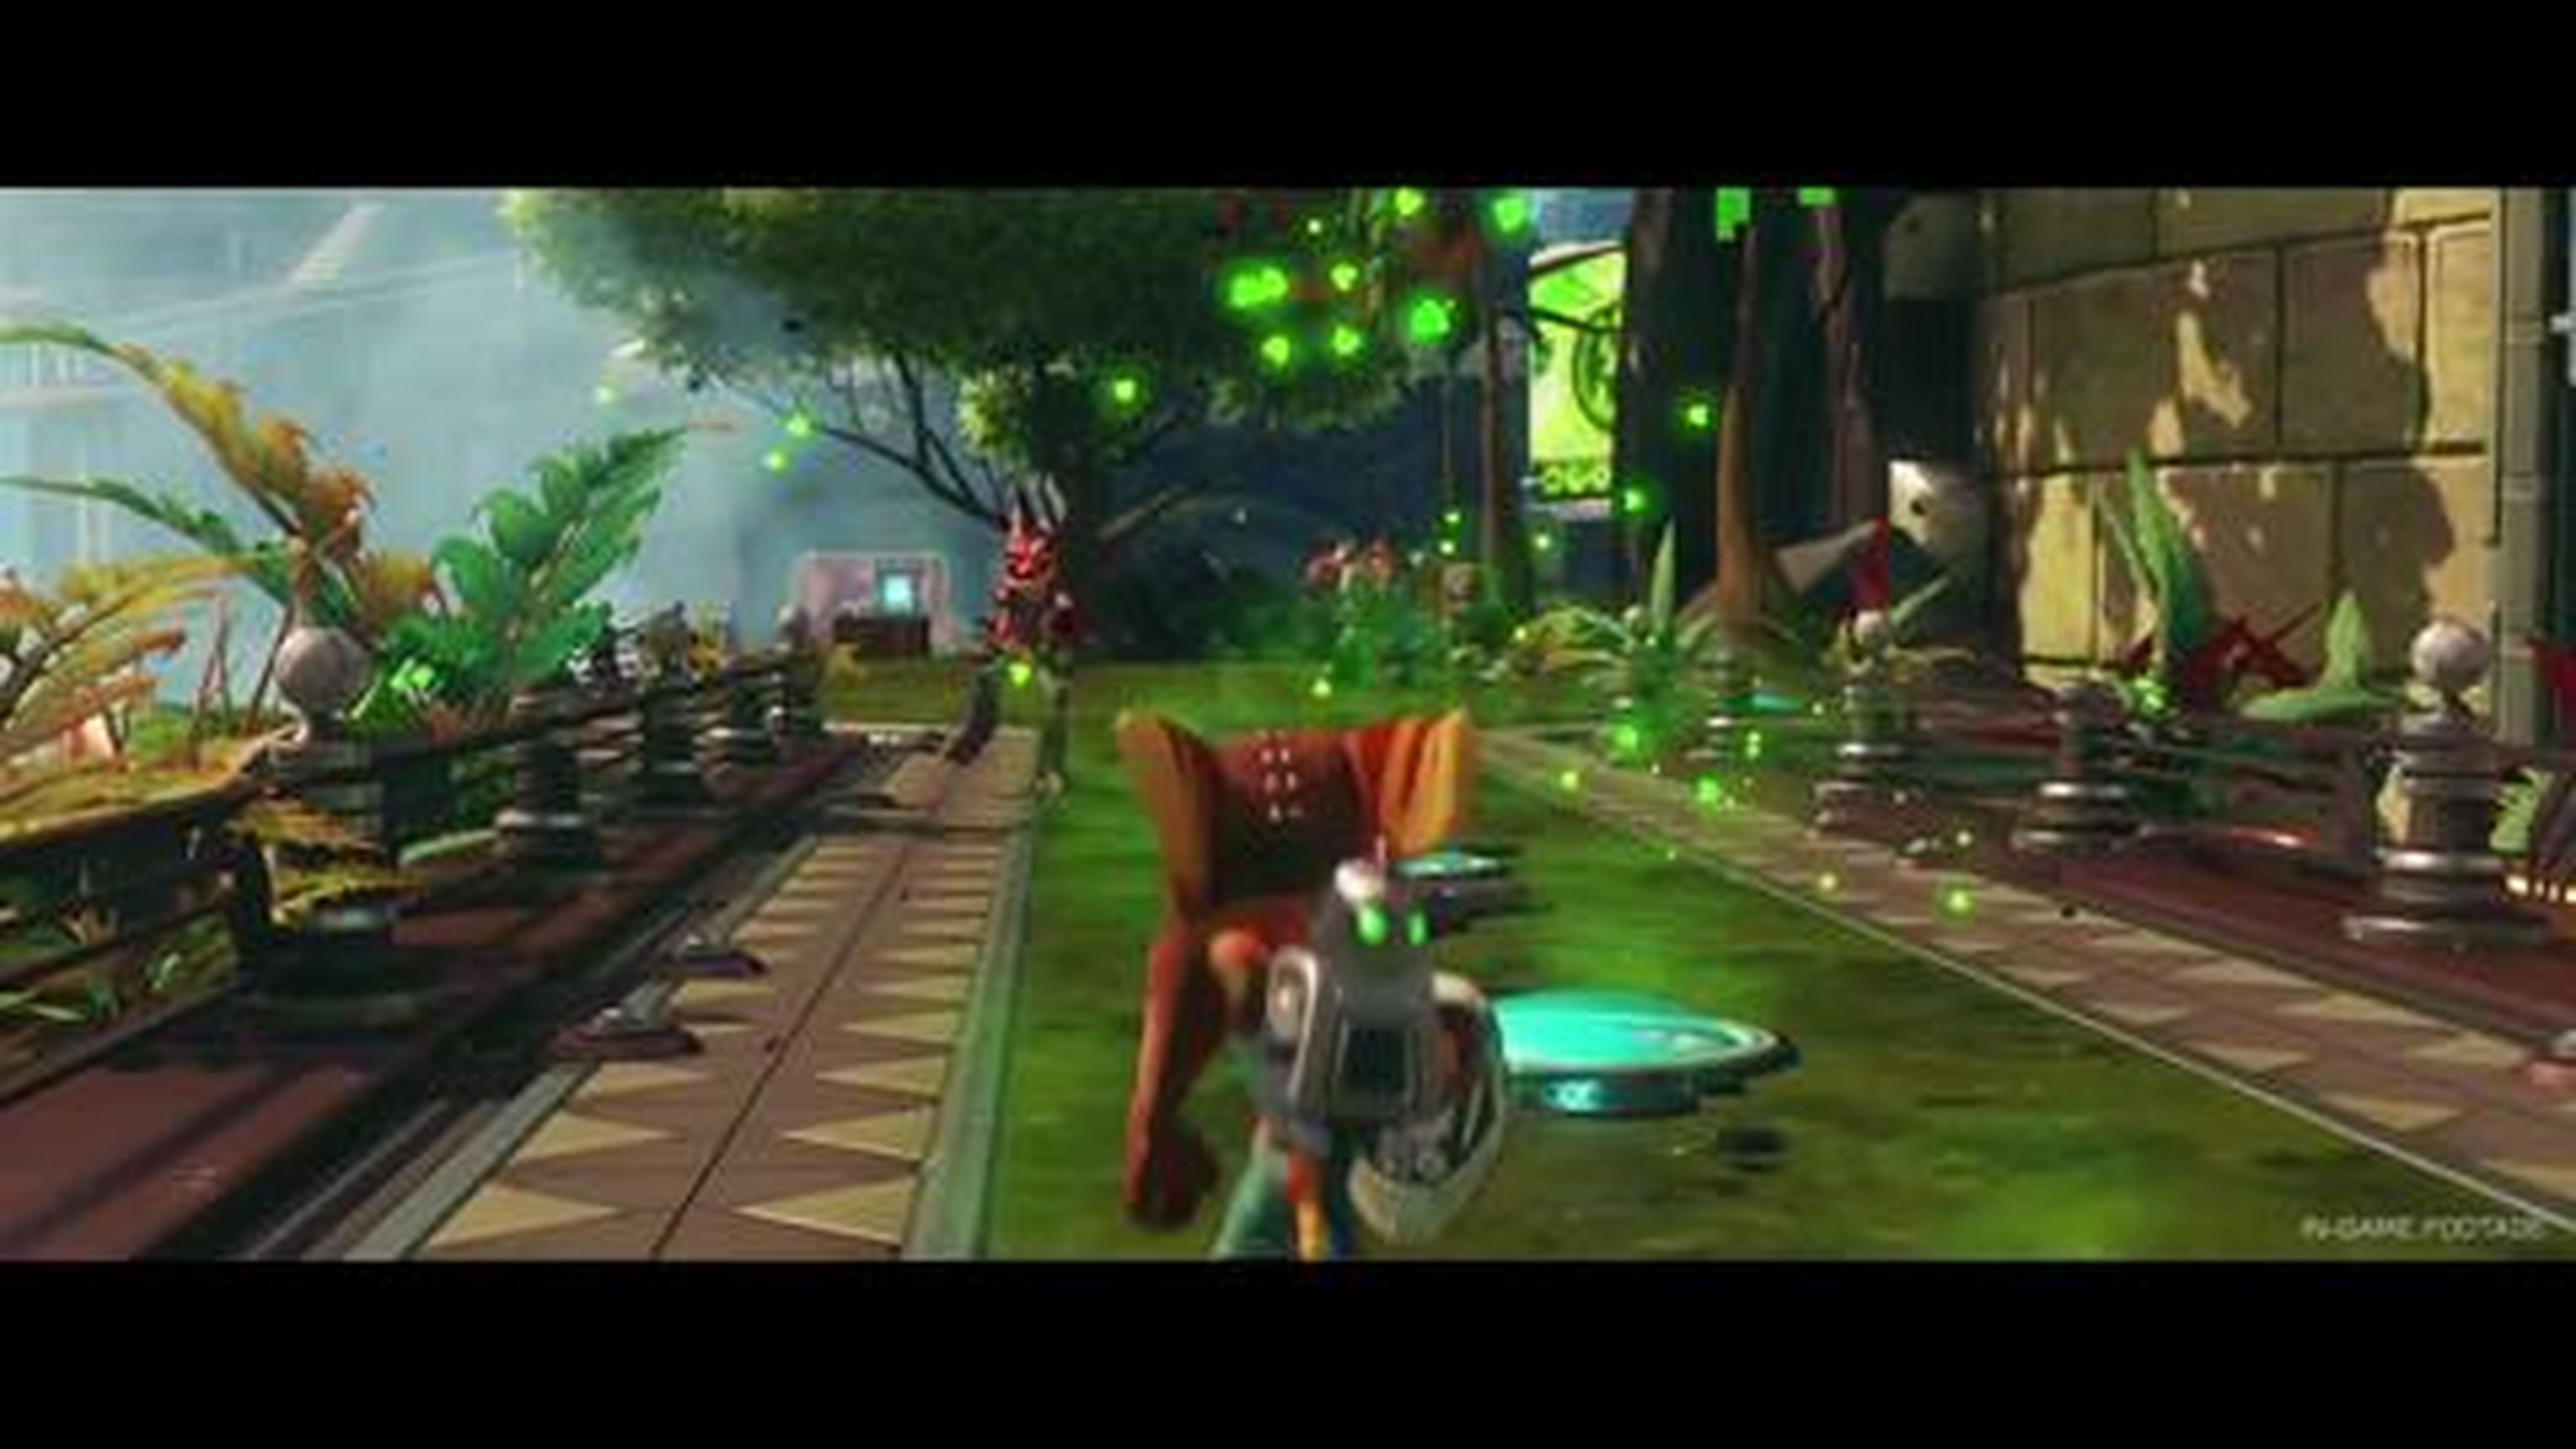 Ratchet & Clank on PS4 re-announcement trailer